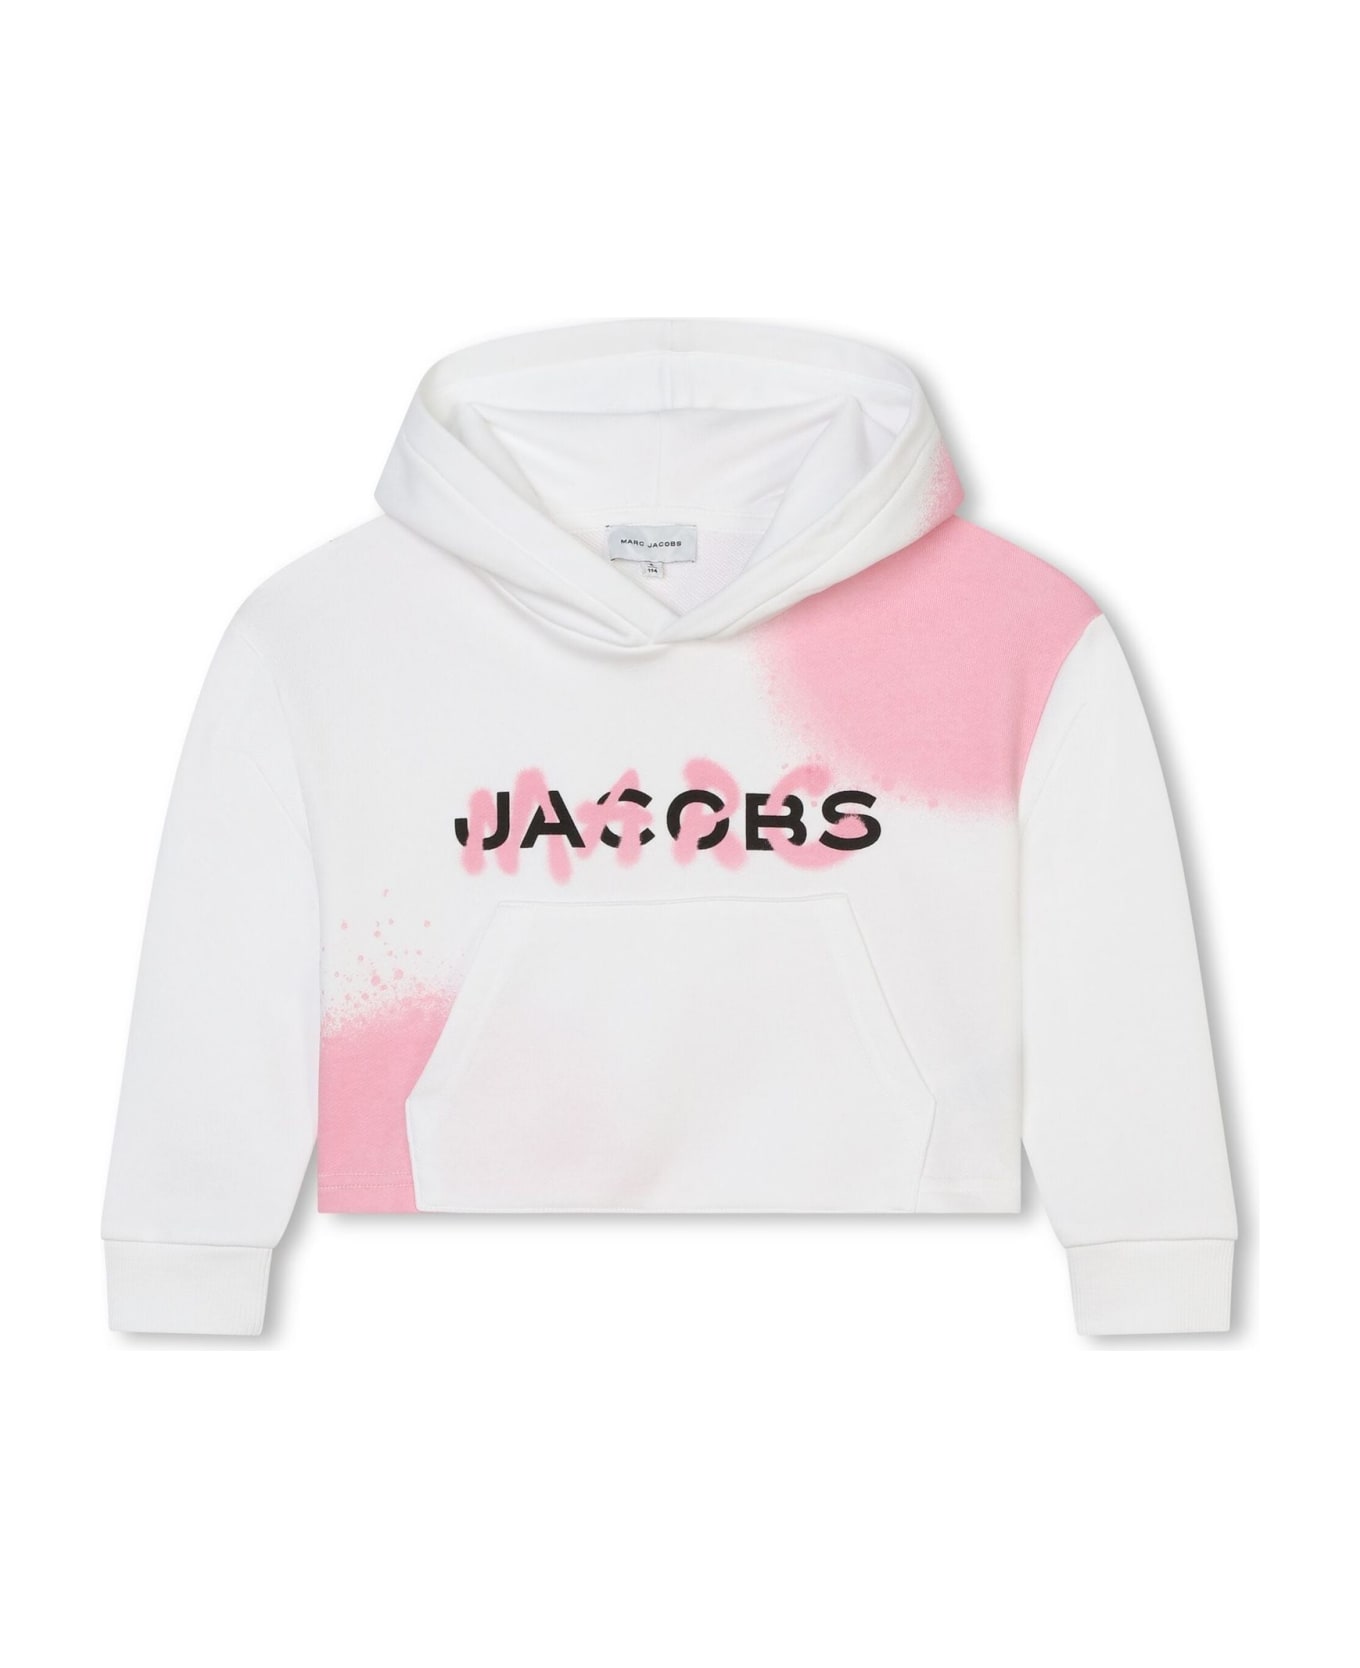 Marc Jacobs Sweaters White - White